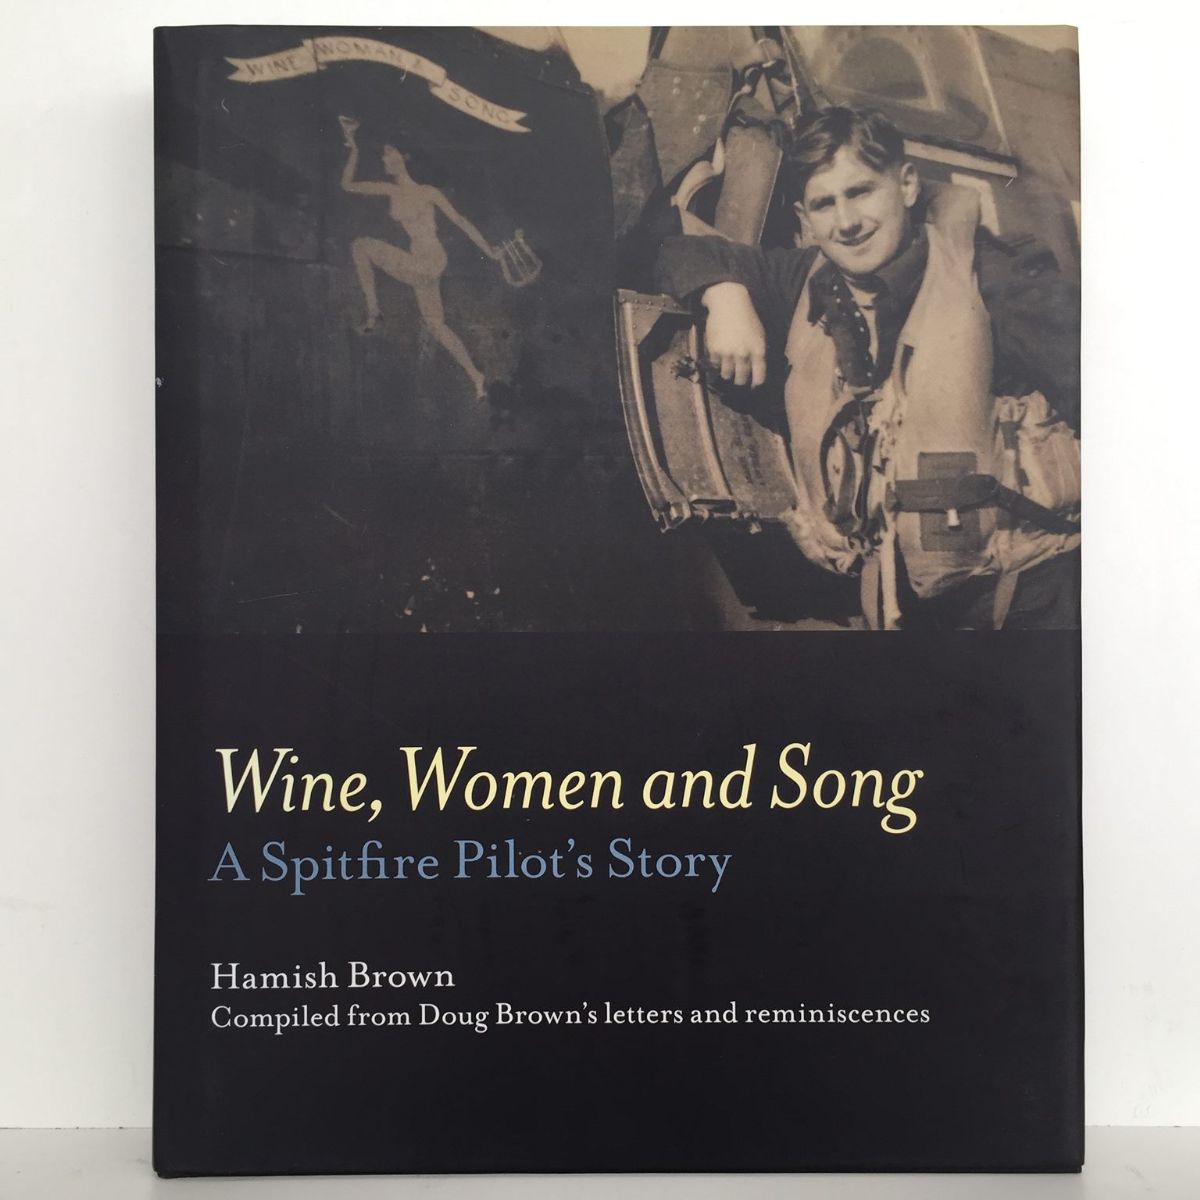 WINE, WOMEN AND SONG: A Spitfire Pilot's Story